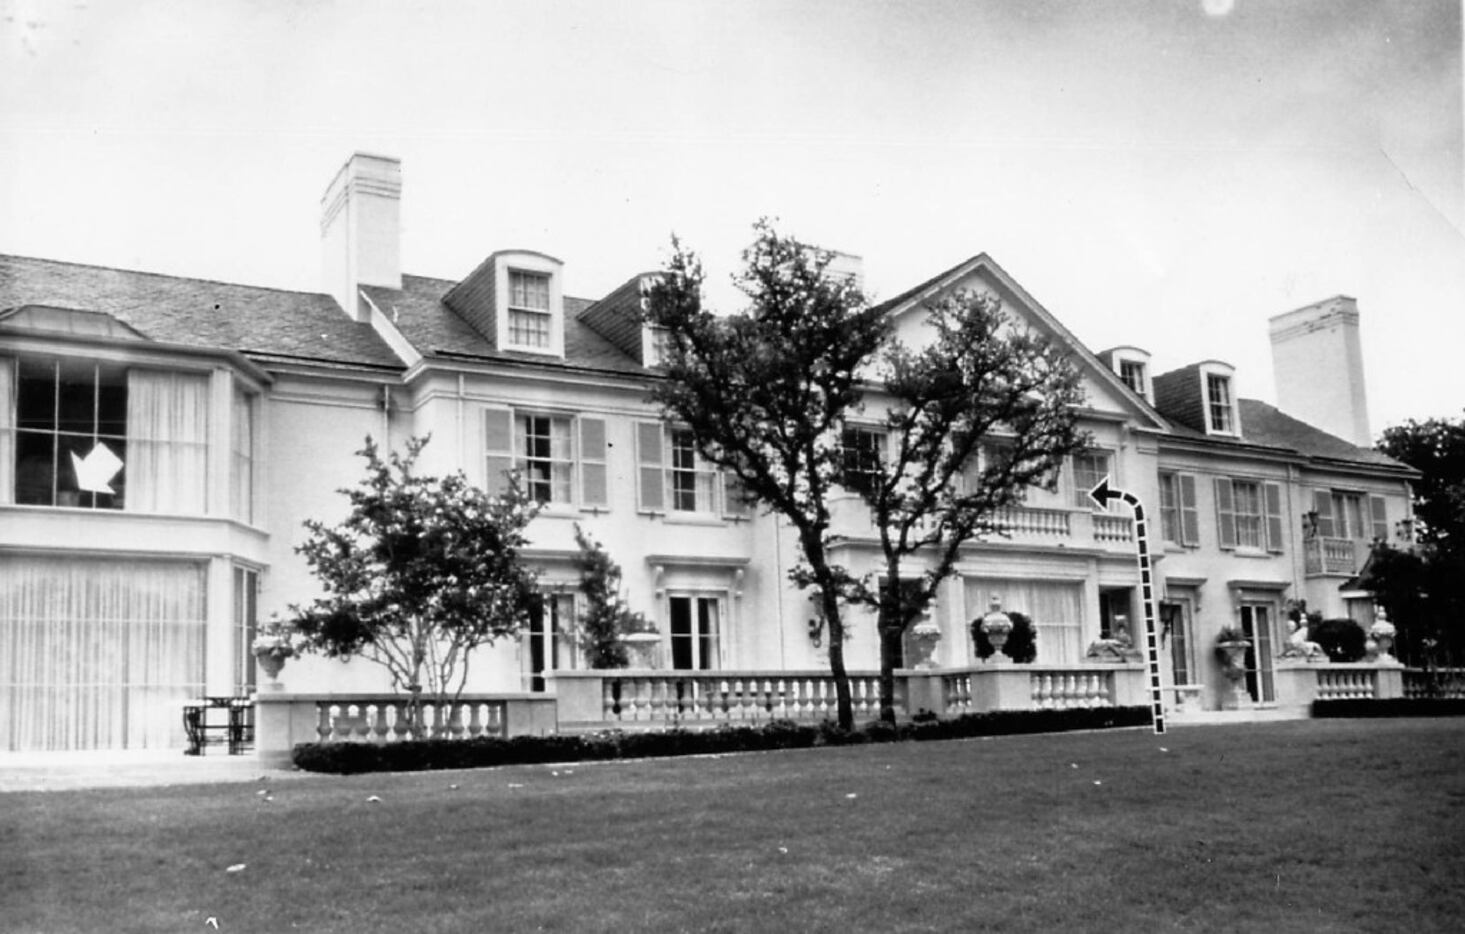 A 1963 photo of the Dallas mansion of James J. "Jim" Ling at 10300 Gaywood. The dotted line...